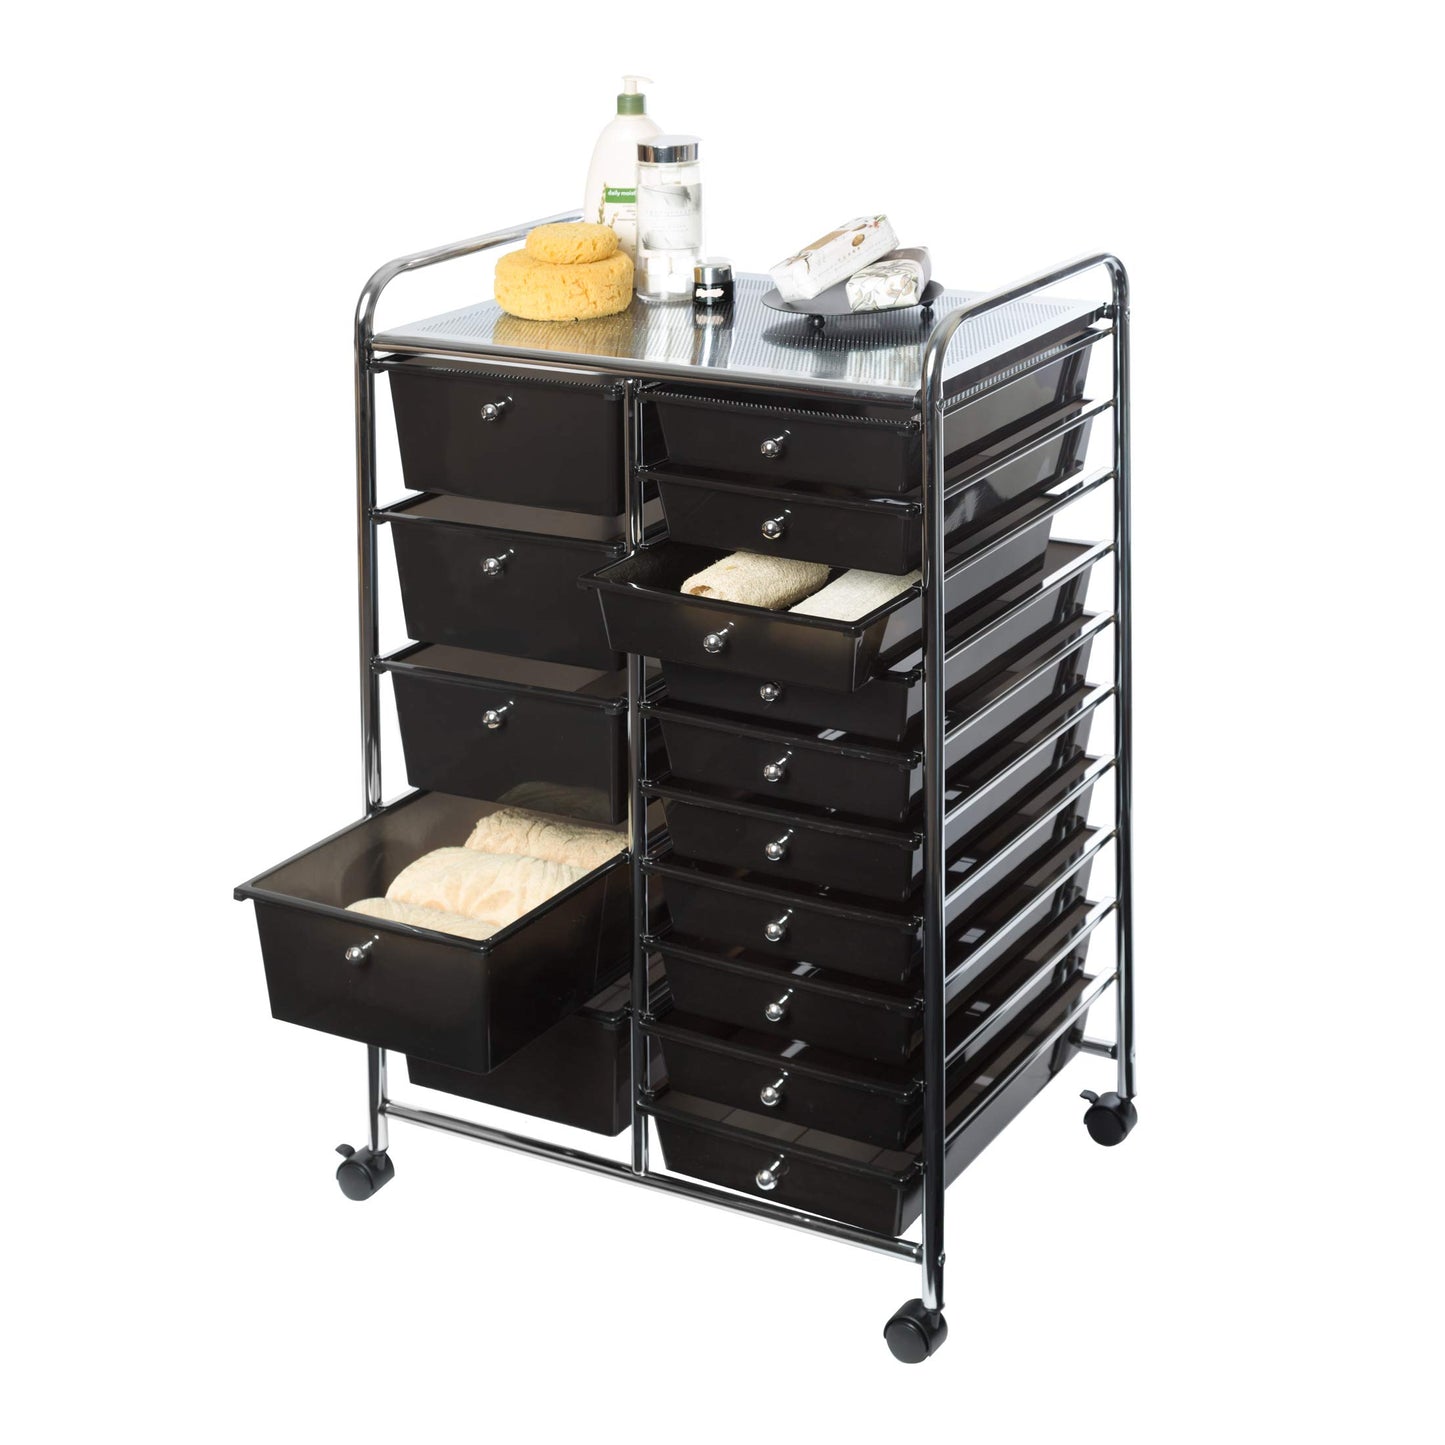 Seville Classics Rolling Utility Organizer Storage Cart for Home Office, School, Classroom, Scrapbook, Hobby, Craft, 15 Drawer, Black